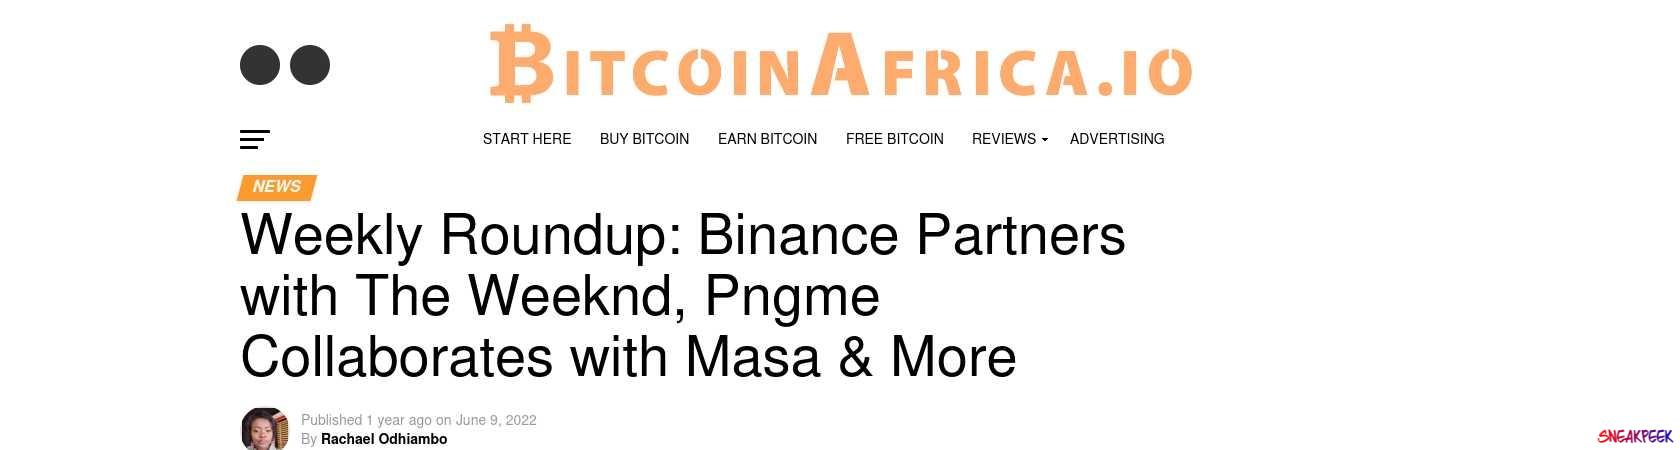 Read the full Article:  ⭲ Weekly Roundup: Binance Partners with The Weeknd, Pngme Collaborates with Masa & More